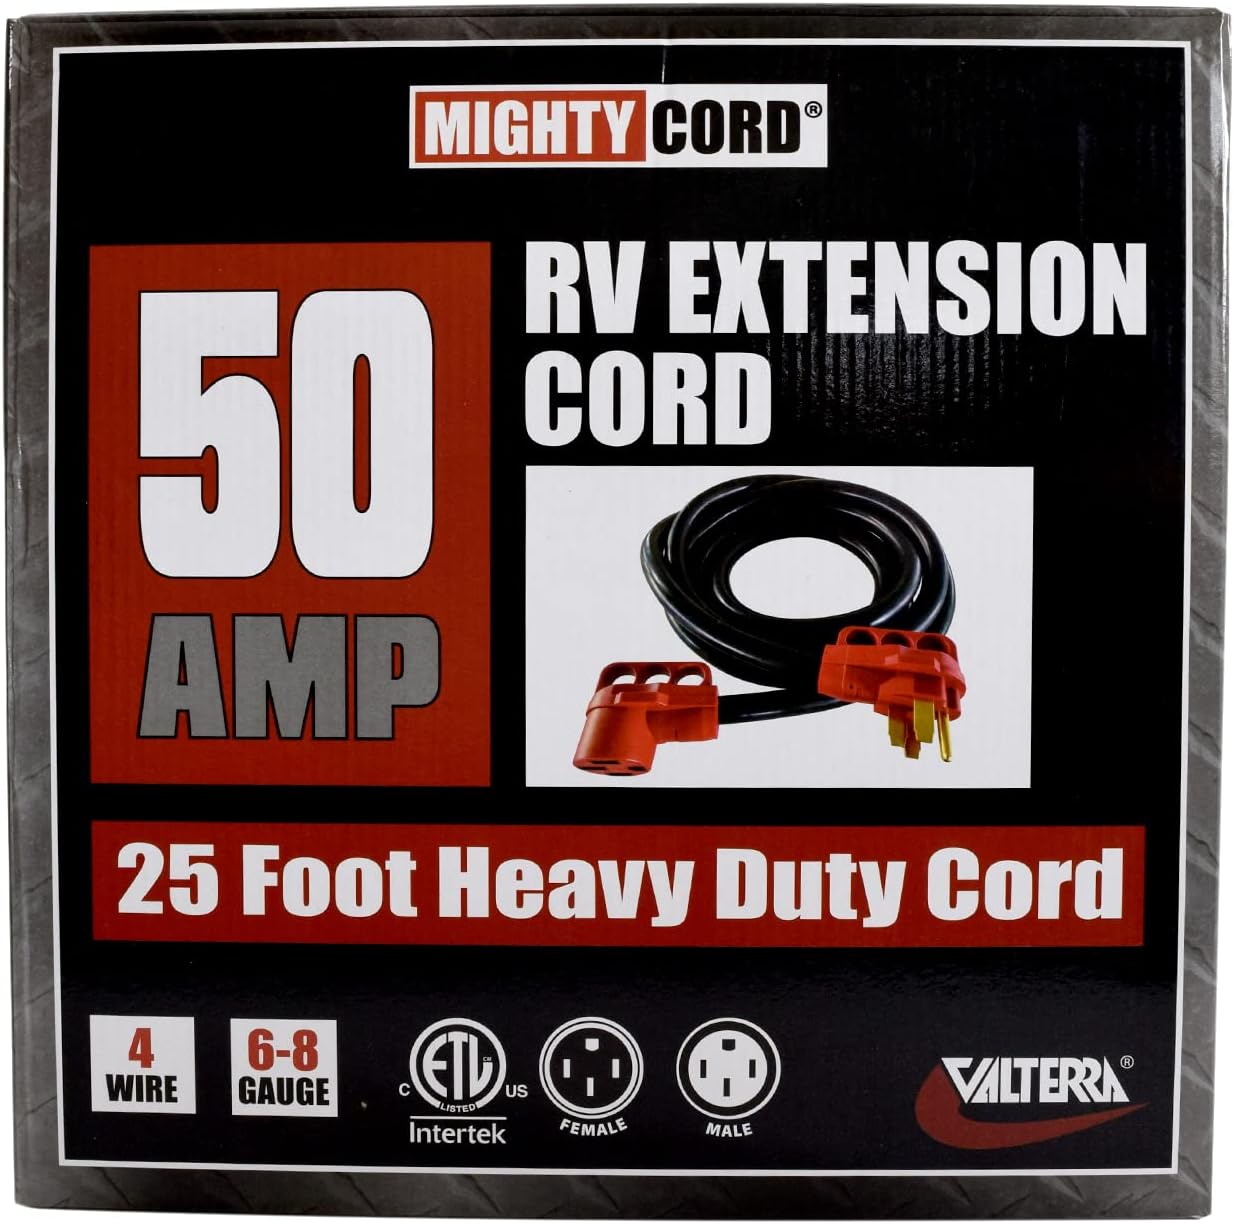 Valterra Mighty Cord 25ft, 50 Amp EV Extension Cord